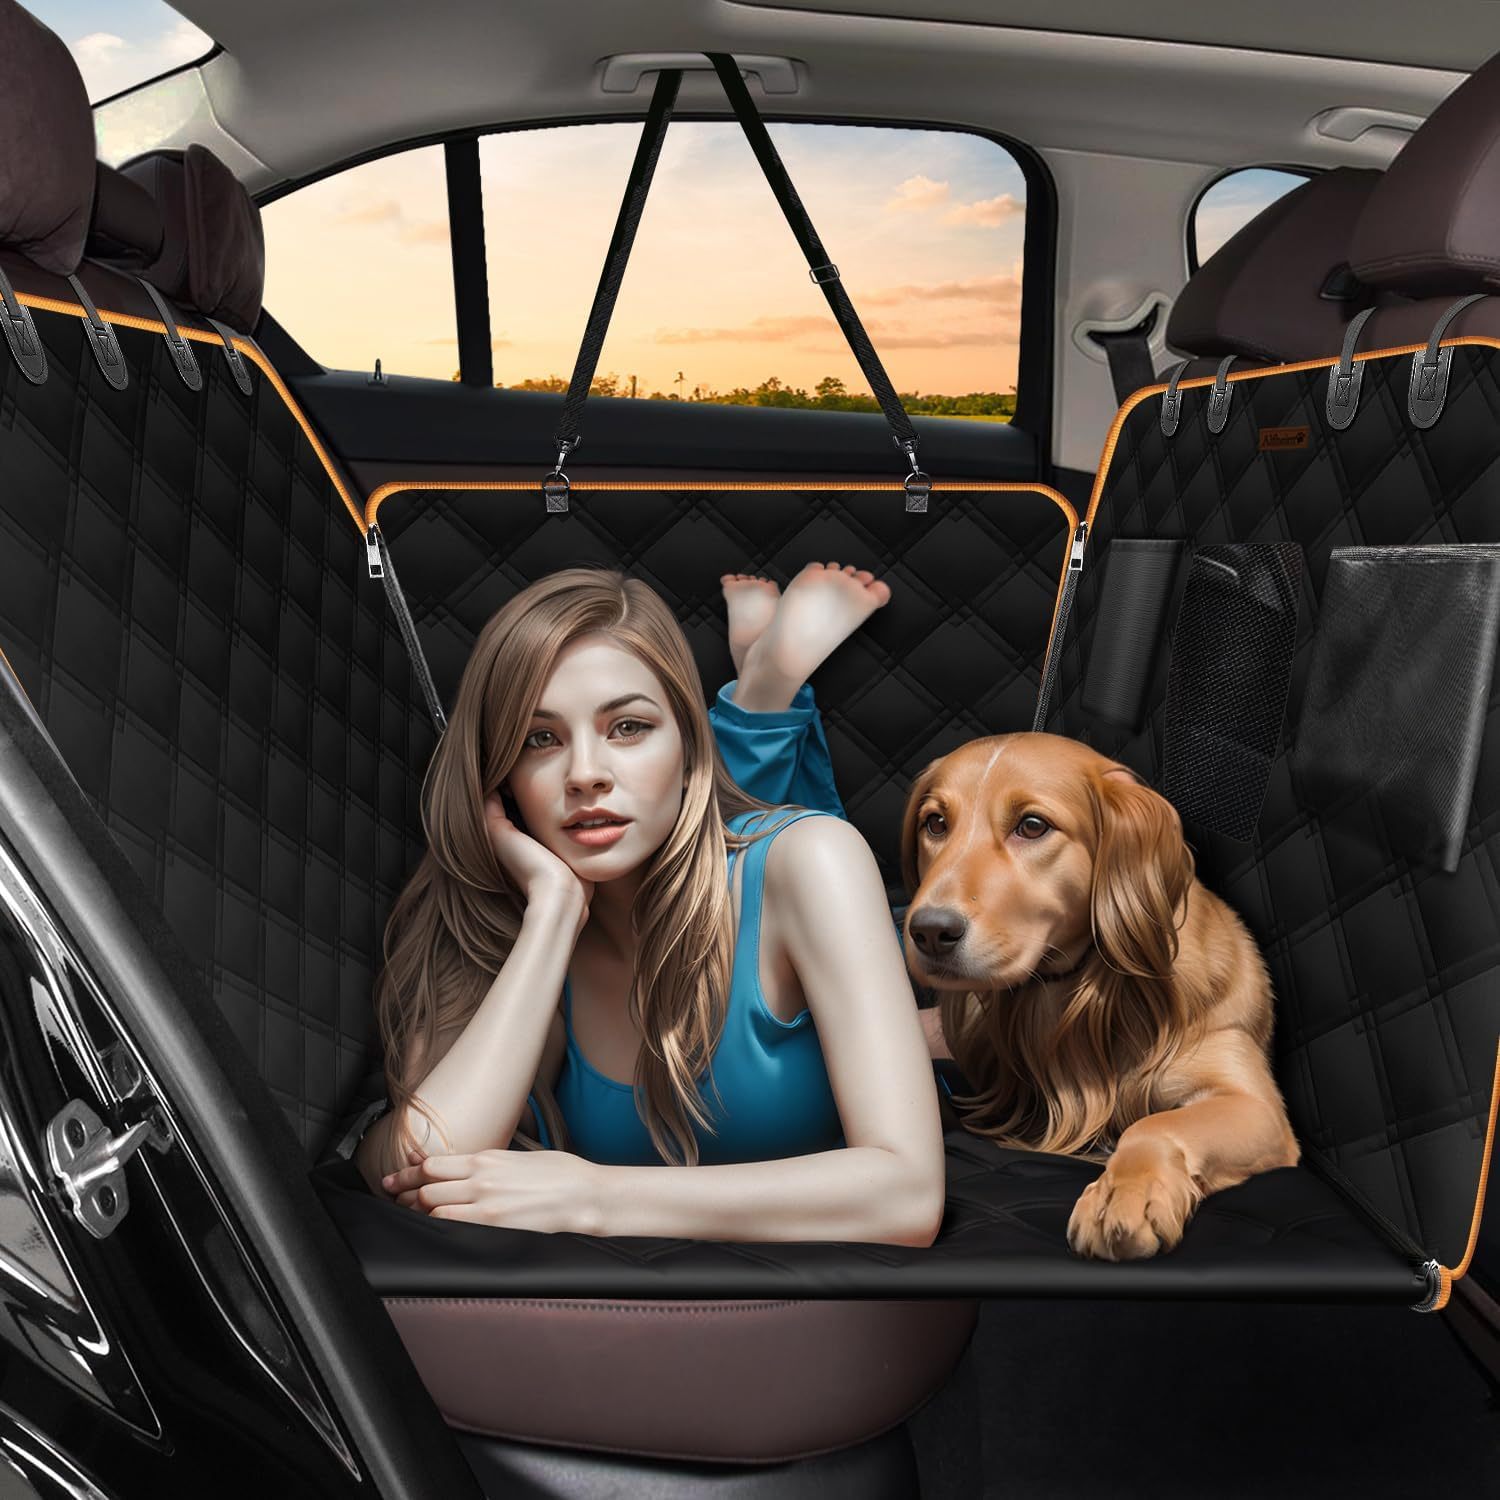 

Dog Car Back Seat Extender, Waterproof Scratch-proof Hard Bottom Hammock Travel Bed With Mesh Window Storage Pocket Seat Anchor, Back Seat Protector For Most Cars Off-road Vehicles, Orange